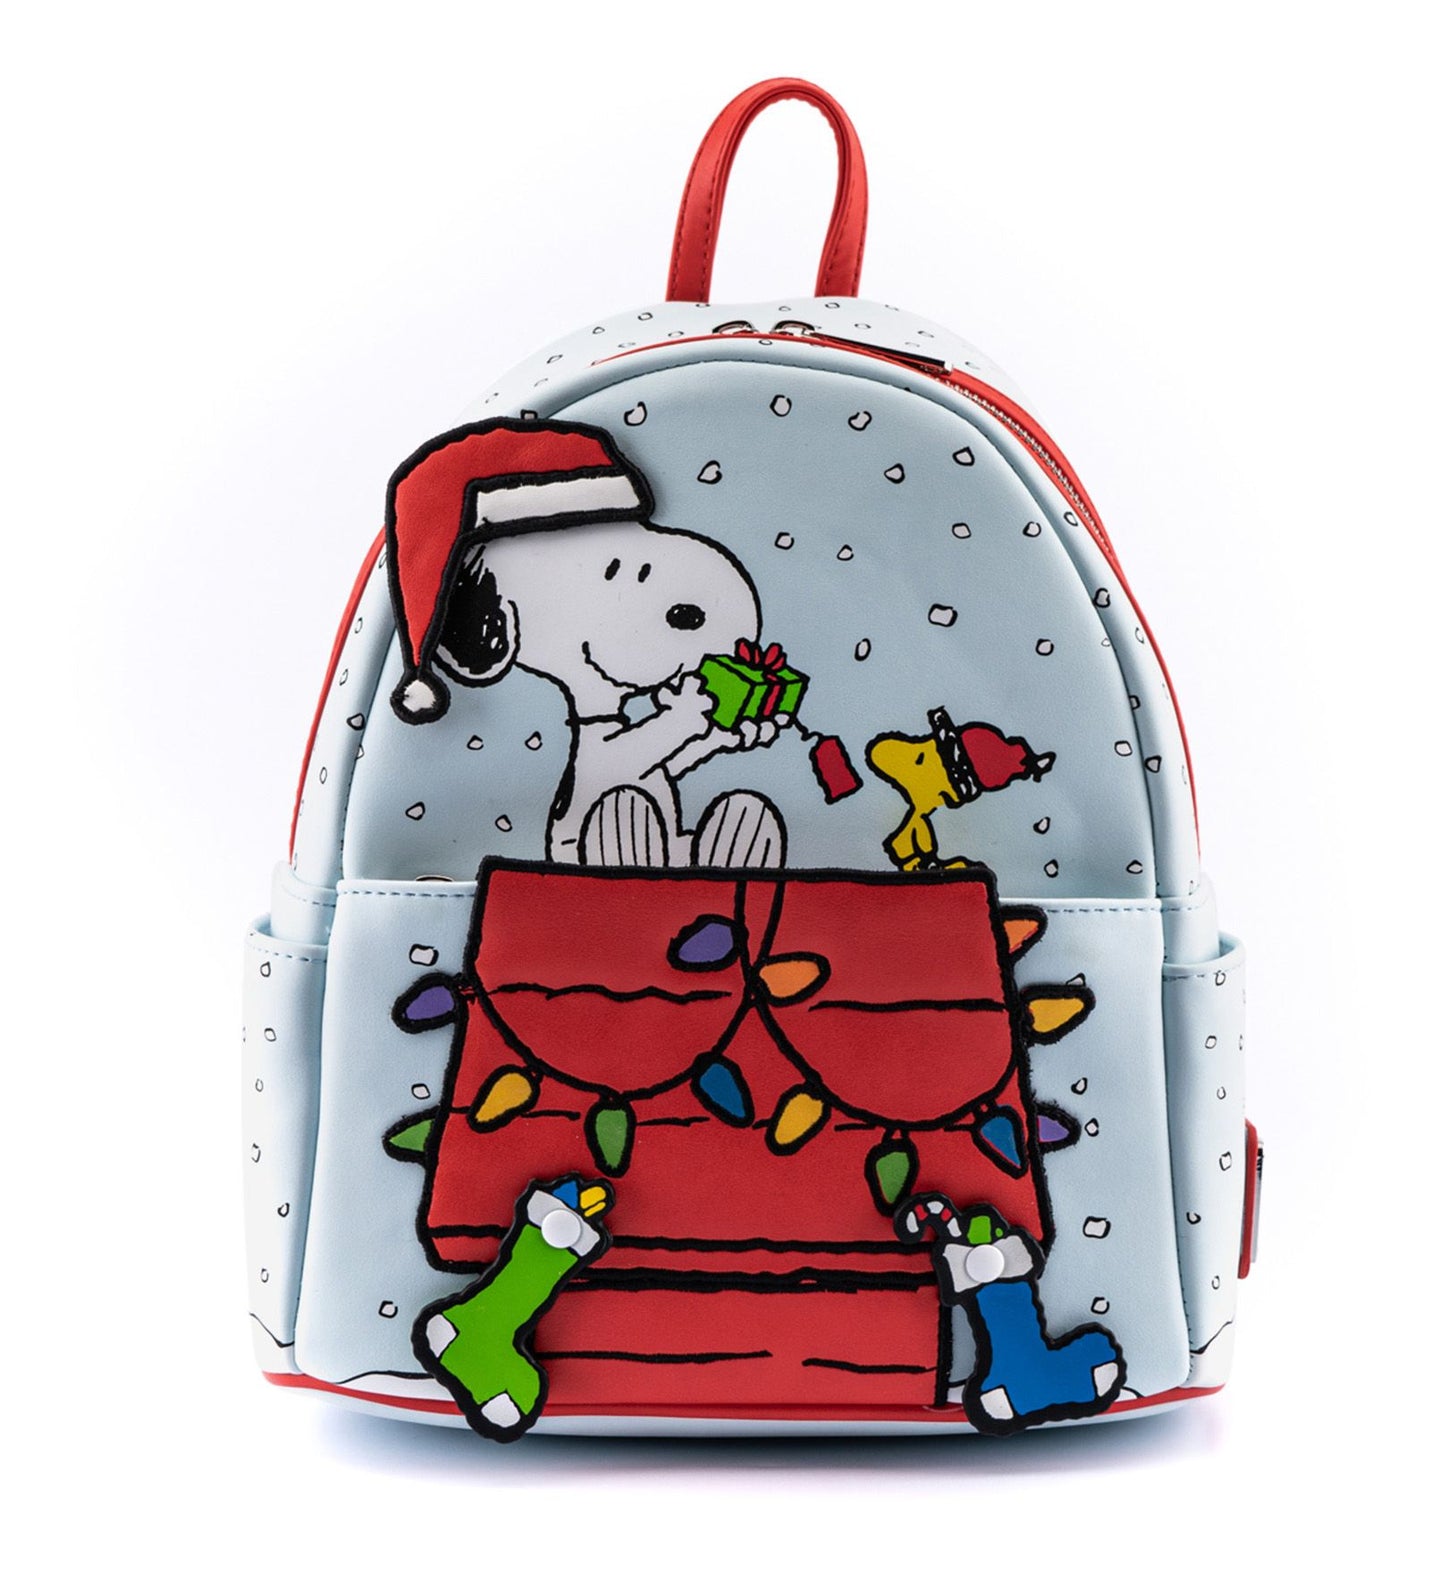 The Peanuts Gift Giving Snoopy and Woodstock Mini Backpack